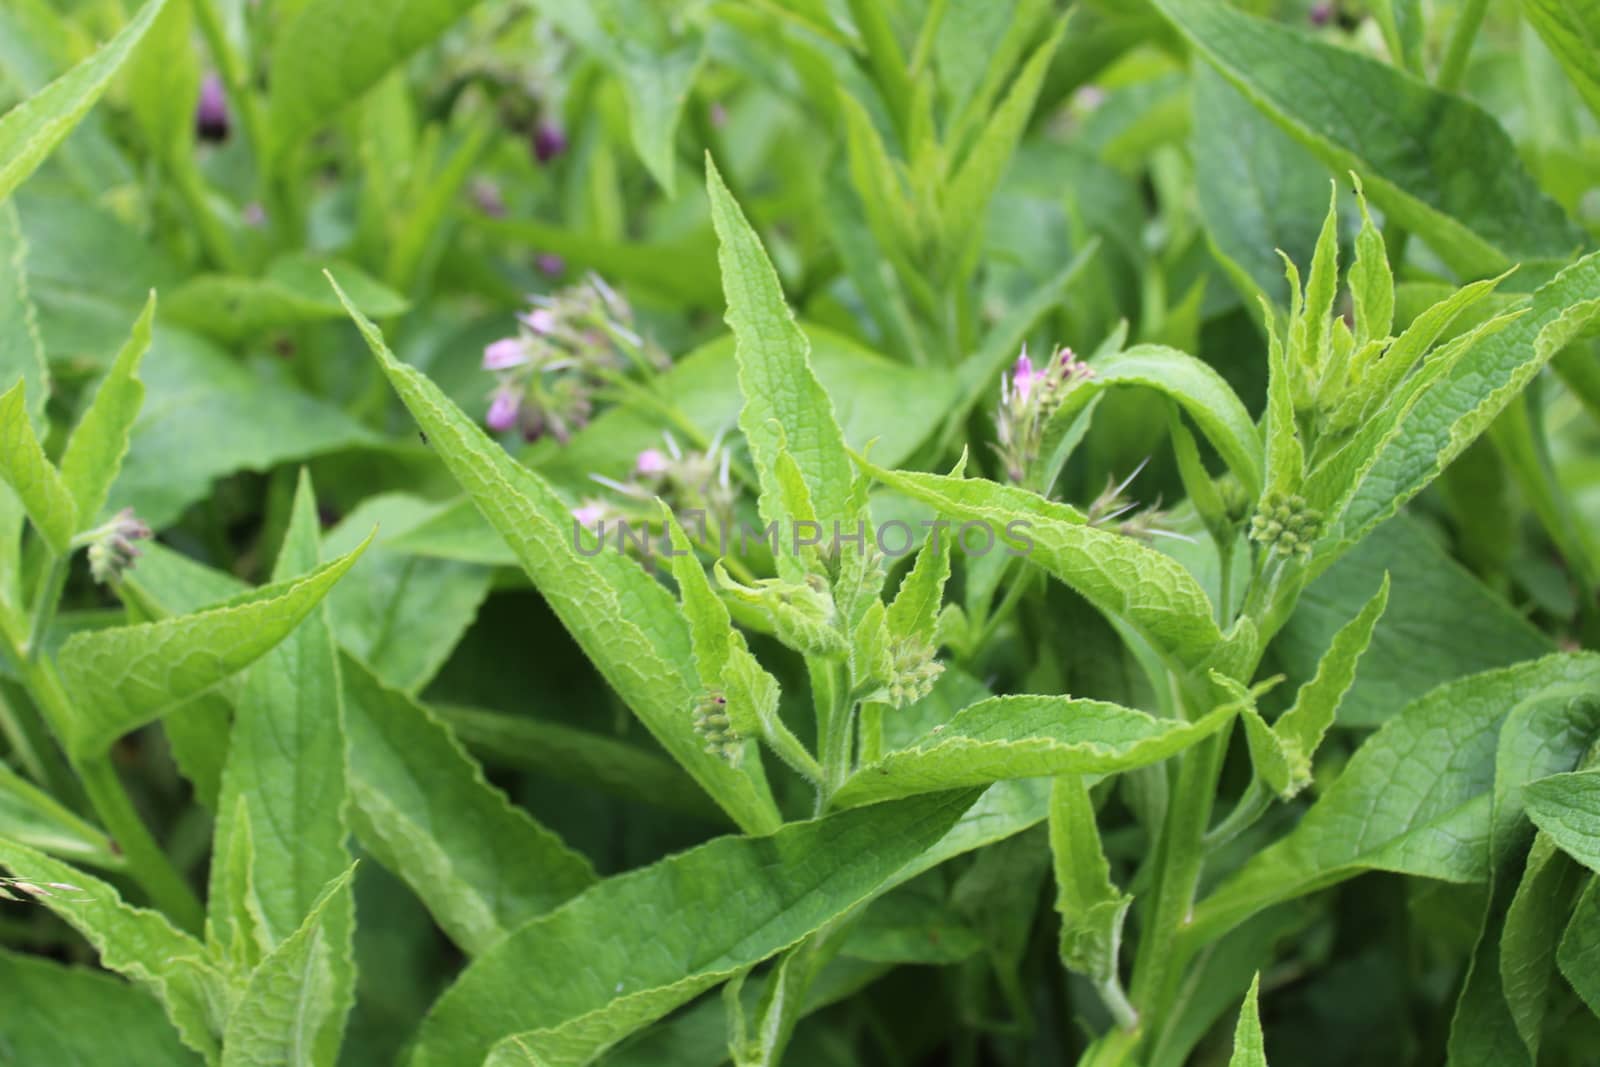 The picture shows a field of comfrey with blossoms